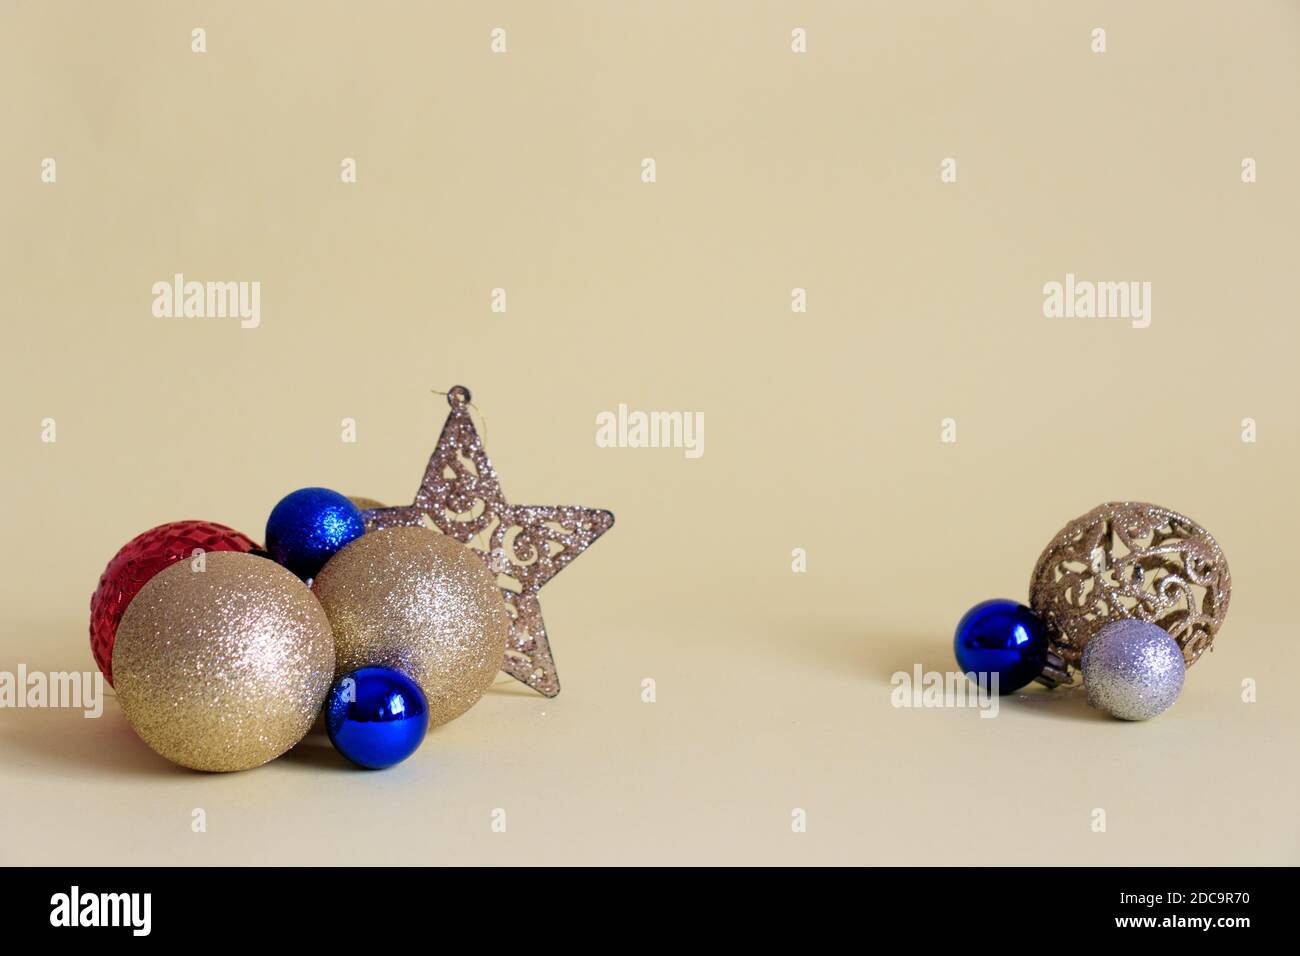 Christmas ornaments and decorations, winter new years eve concept Stock Photo